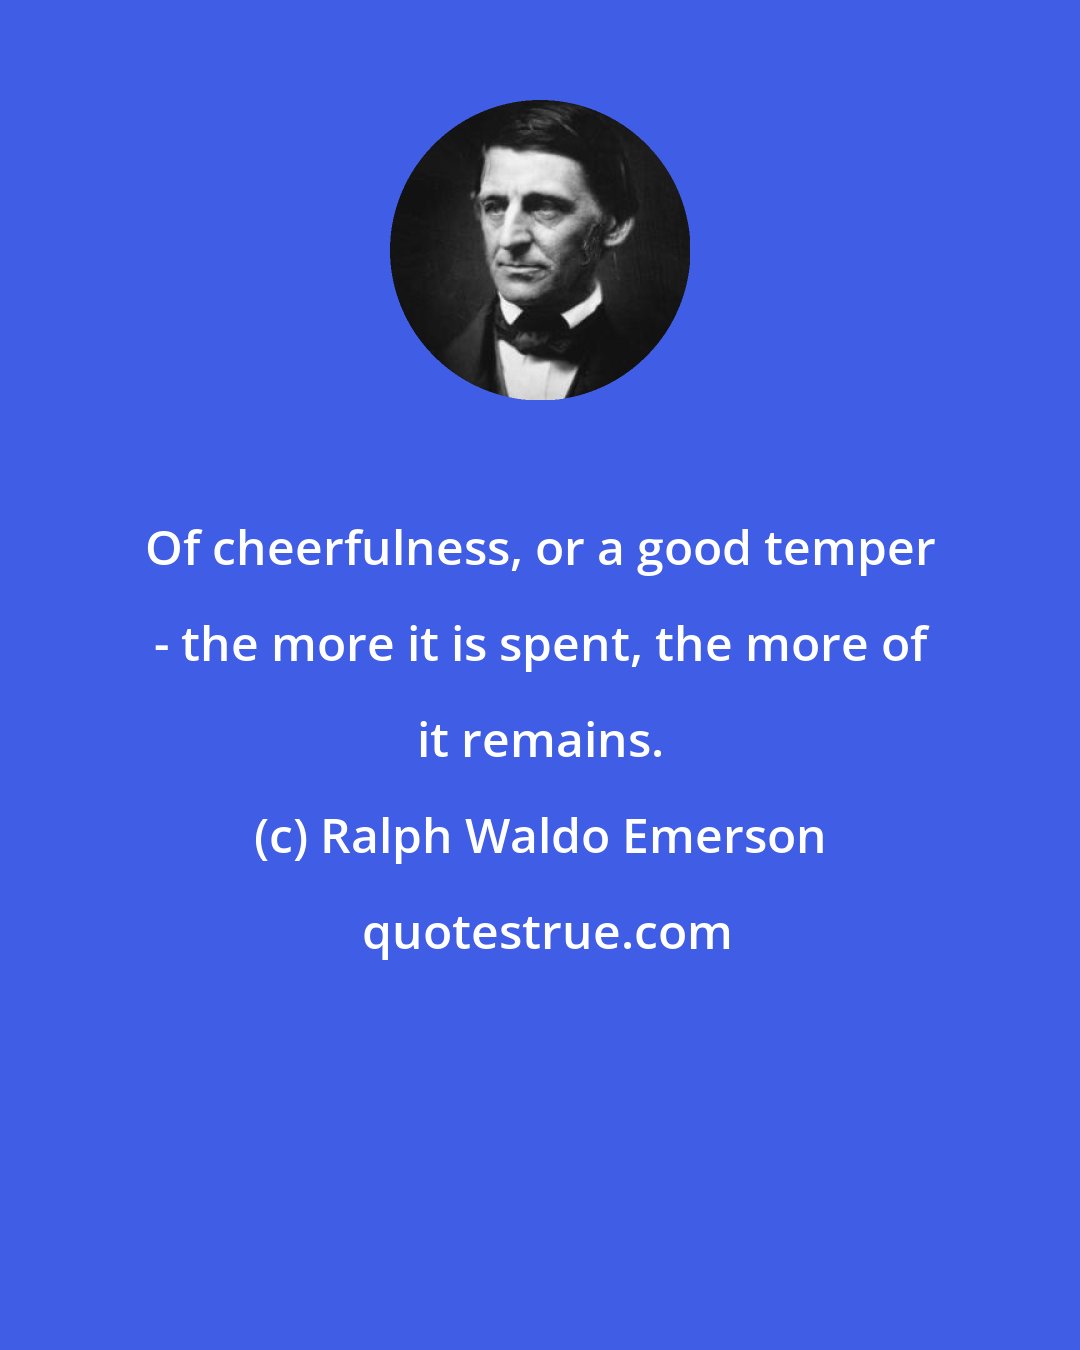 Ralph Waldo Emerson: Of cheerfulness, or a good temper - the more it is spent, the more of it remains.